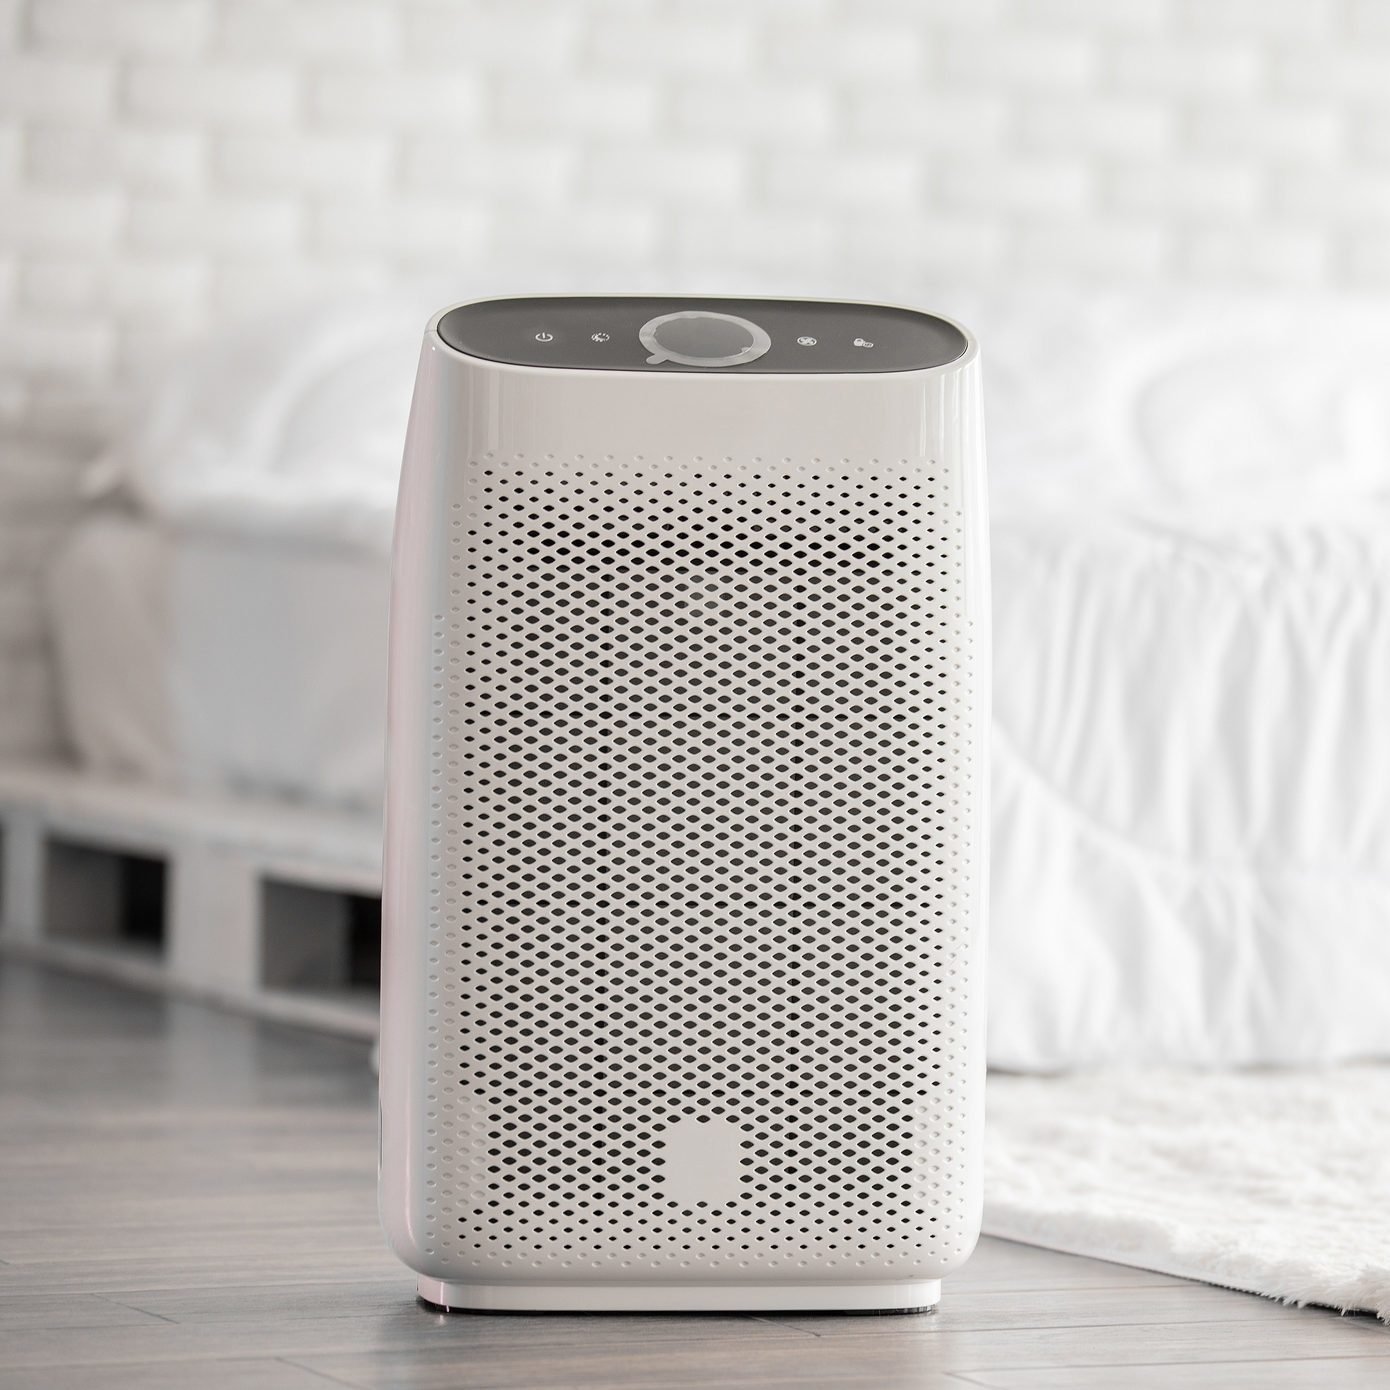 11 Best Air Purifiers for 2022—Air Purifiers for Germs, Allergens